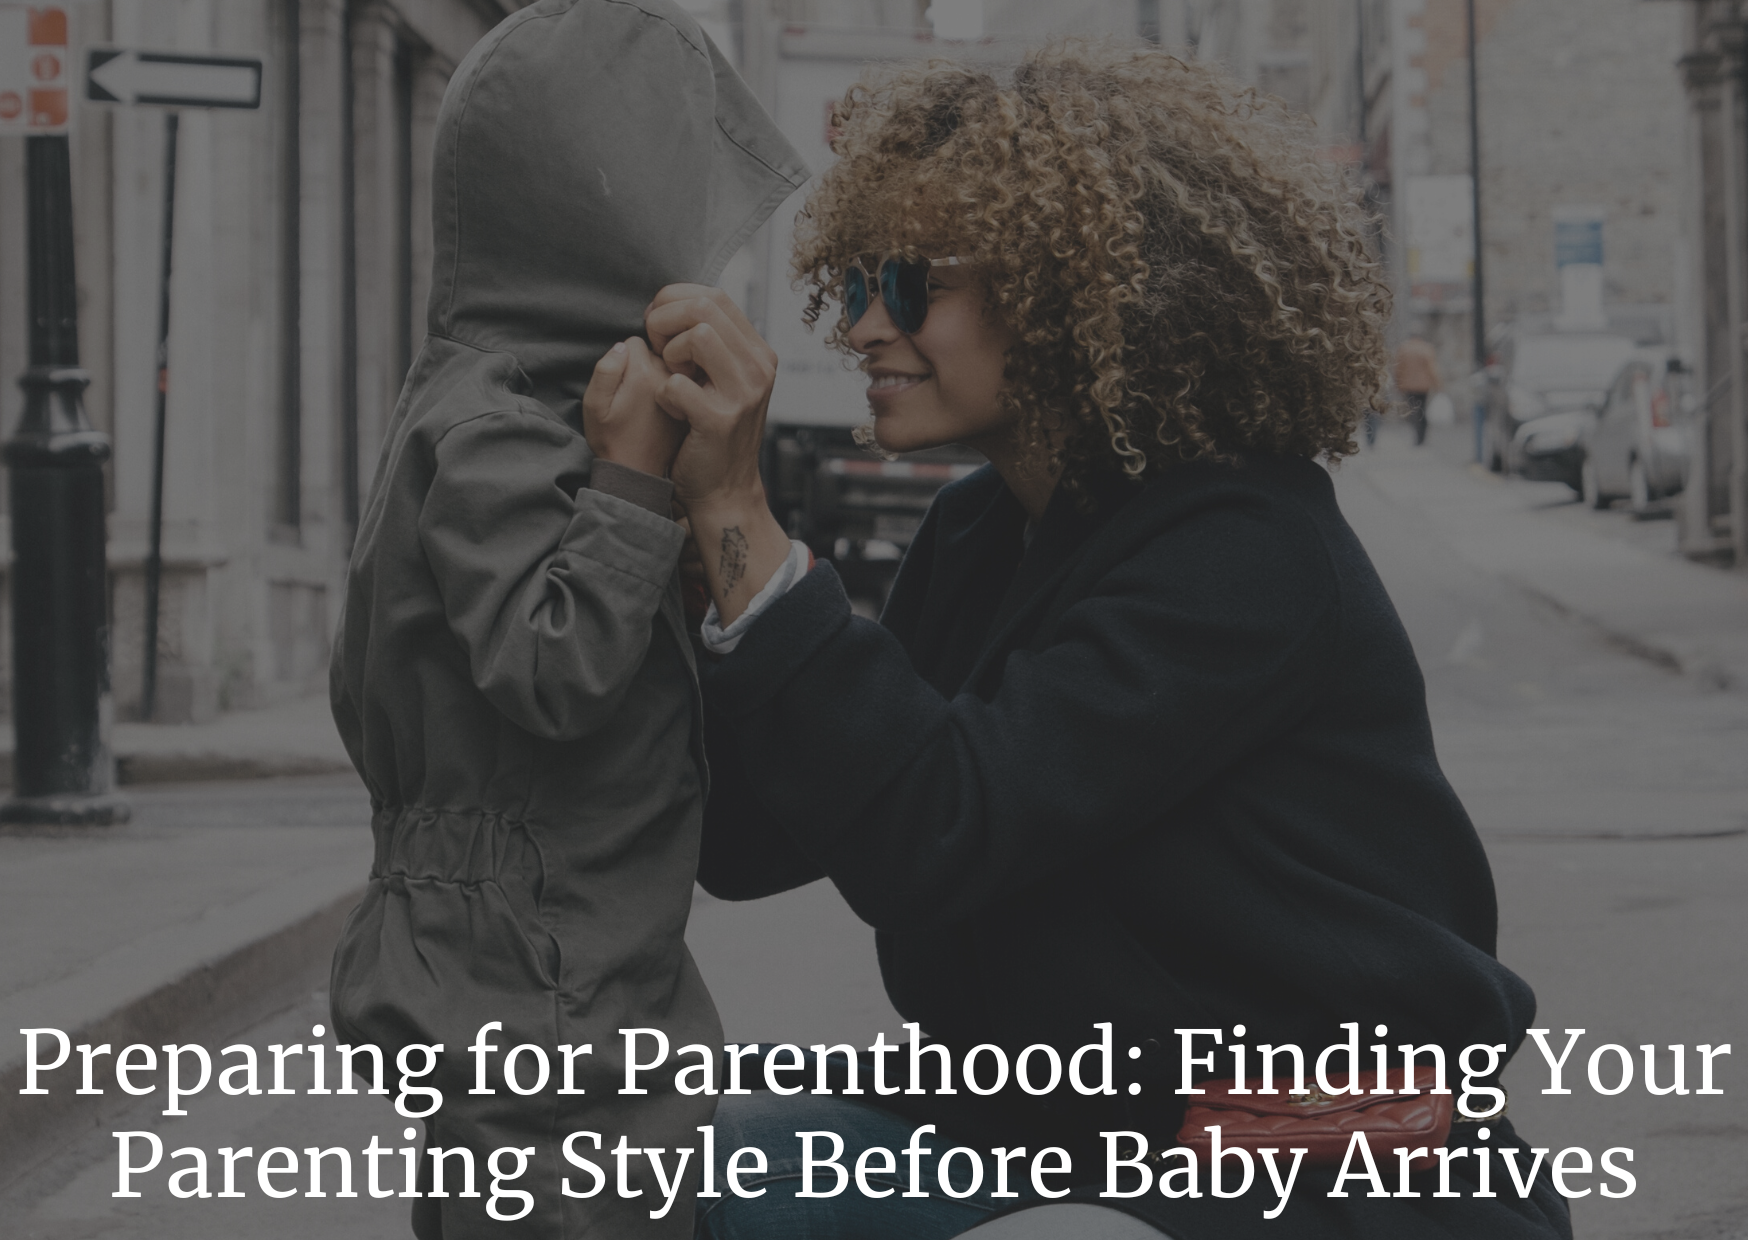 Preparing for Parenthood: Finding Your Parenting Style Before Baby Arrives